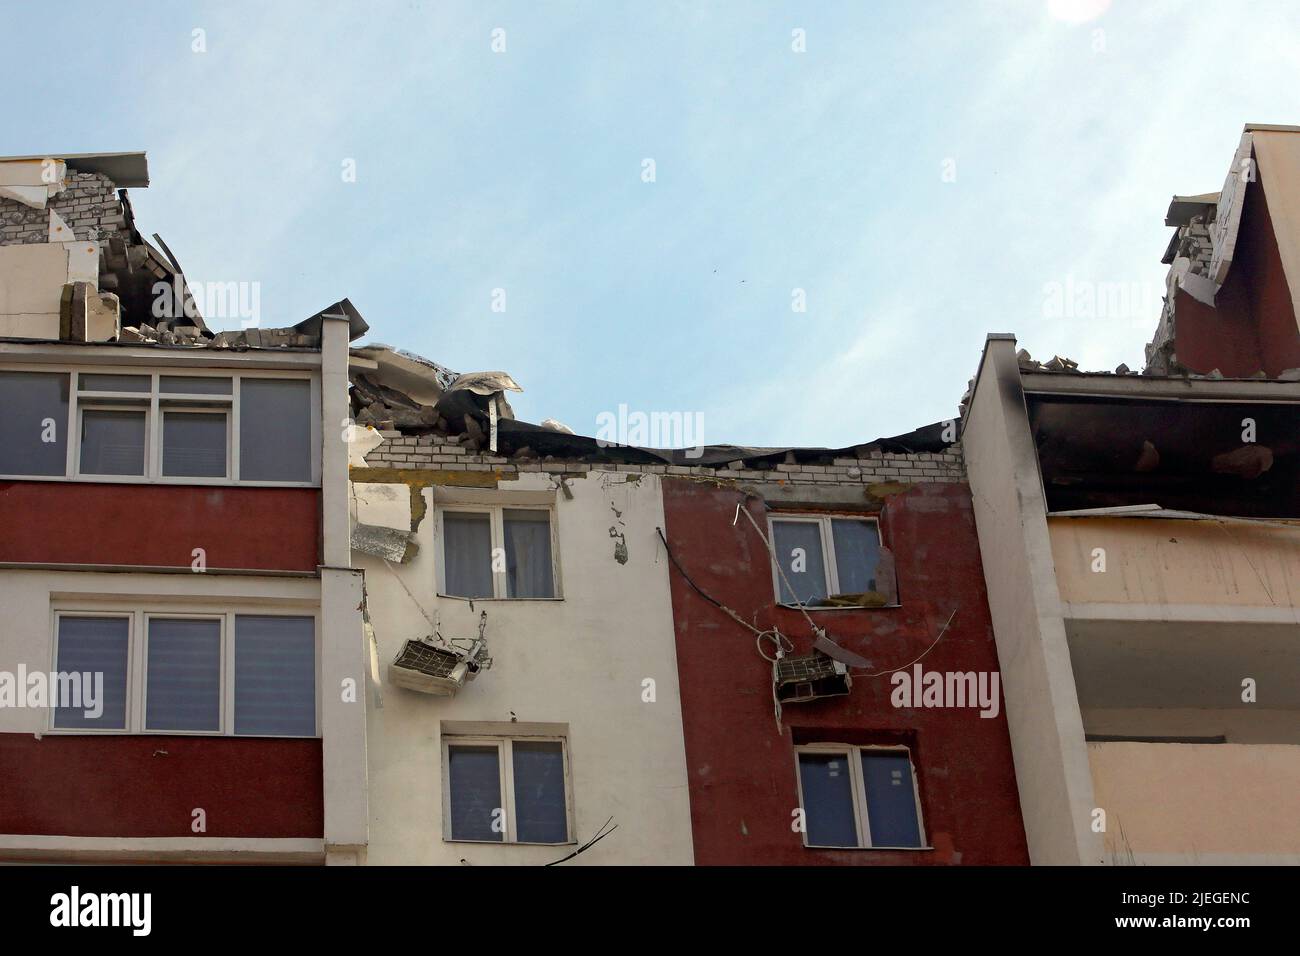 The roof of an apartment block shows damage caused by the shelling of a northern neighbourhood by Russian troops with a BM-30 Smerch multiple rocket launcher, Kharkiv, northeastern Ukraine, June 26, 2022. Photo by Vyacheslav Madiyevskyy/Ukrinform/ABACAPRESS.COM Stock Photo